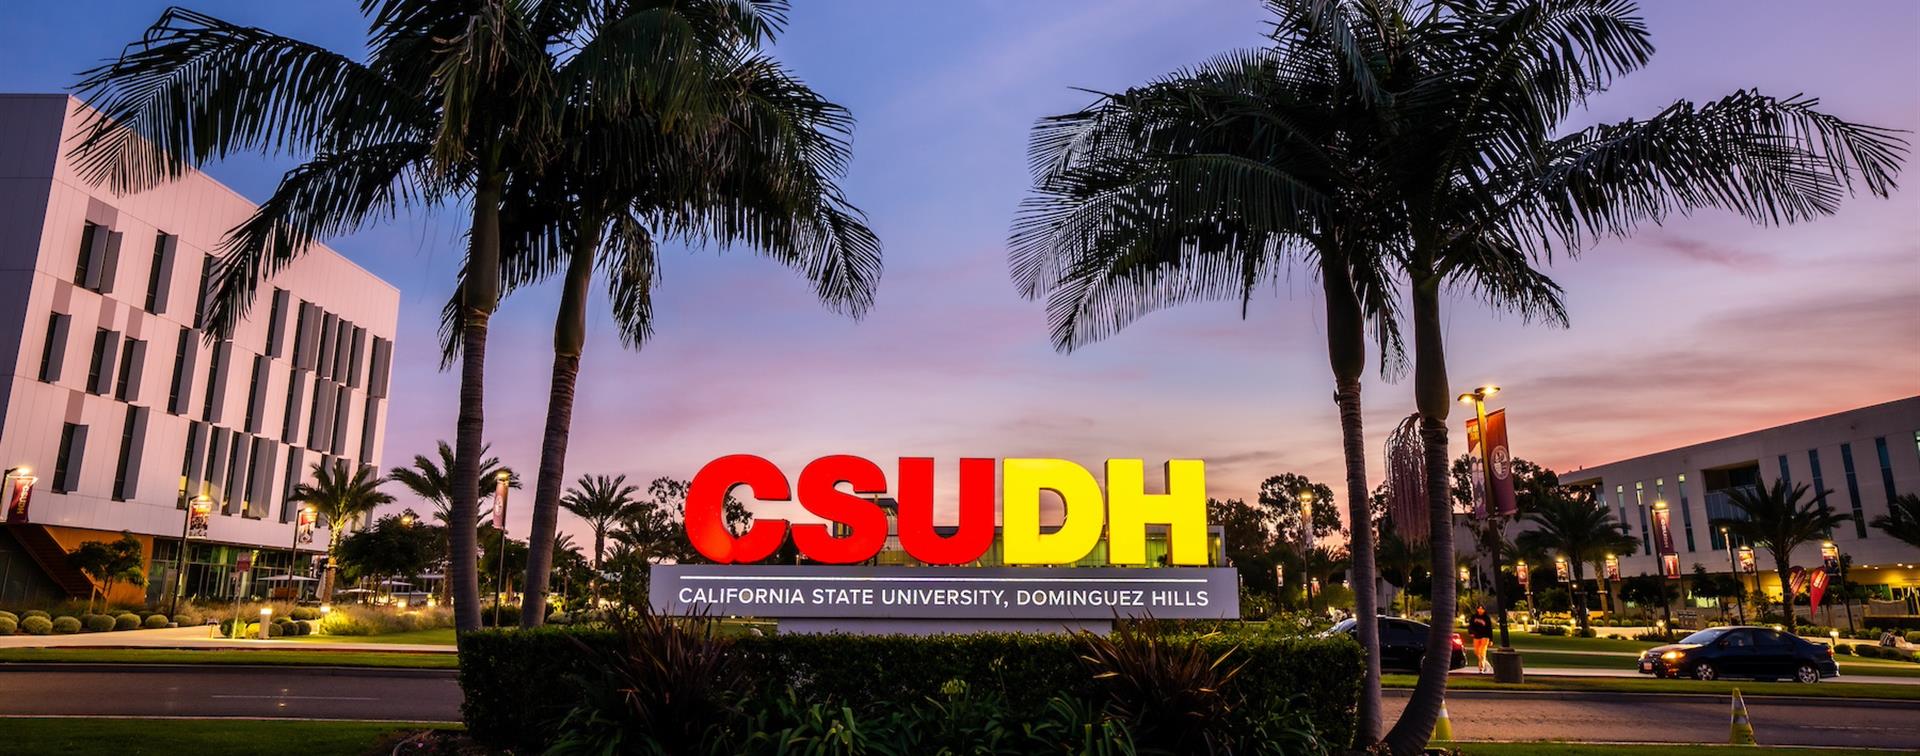 Campus of California State University Domiguez Hills at night